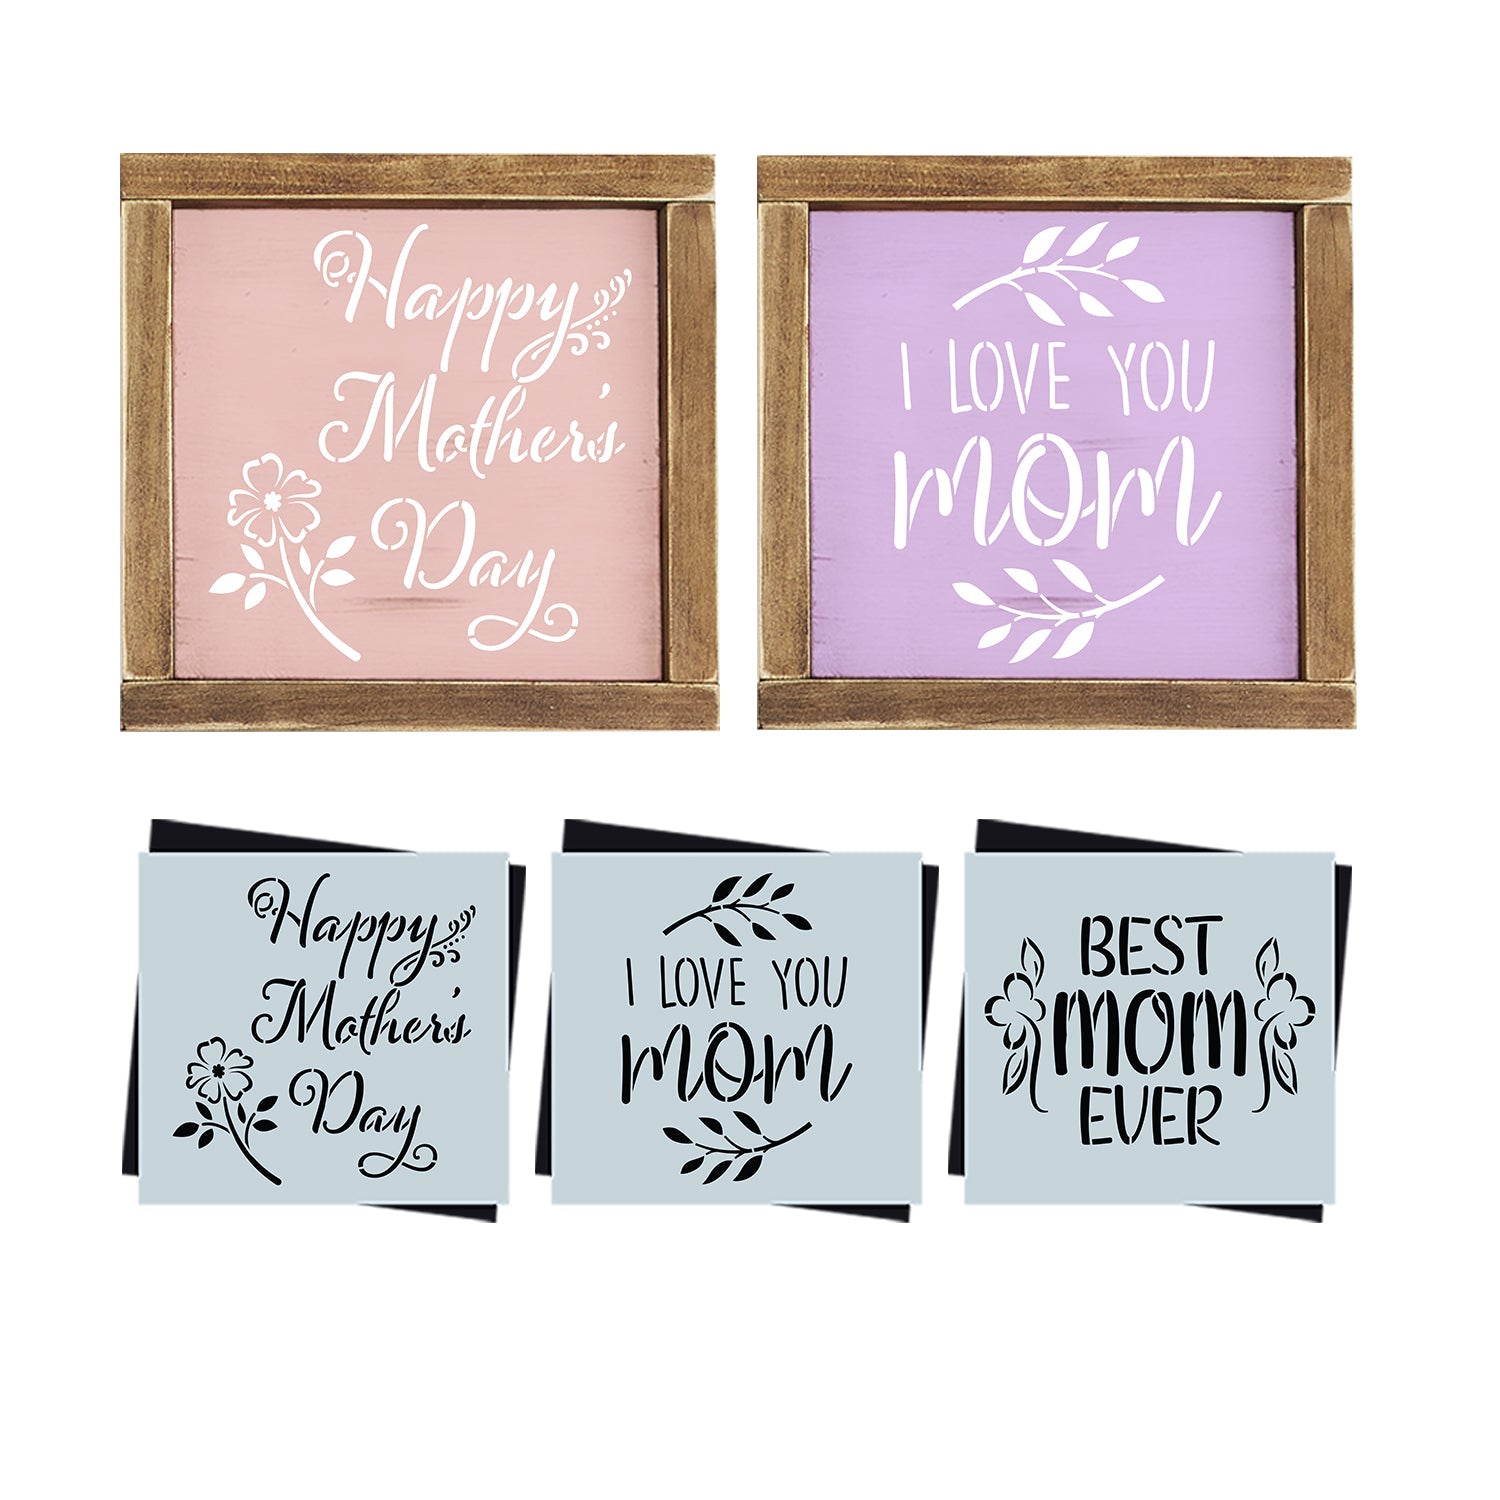 DIY reusable  Mother's Day sign stencils, Mothers day crafts, Happy Mother's Day mini sign stencil with flower, I love you mom mini wood sign stencil, Best mom ever mini wood sign stencil, diy mothers day gift ideas